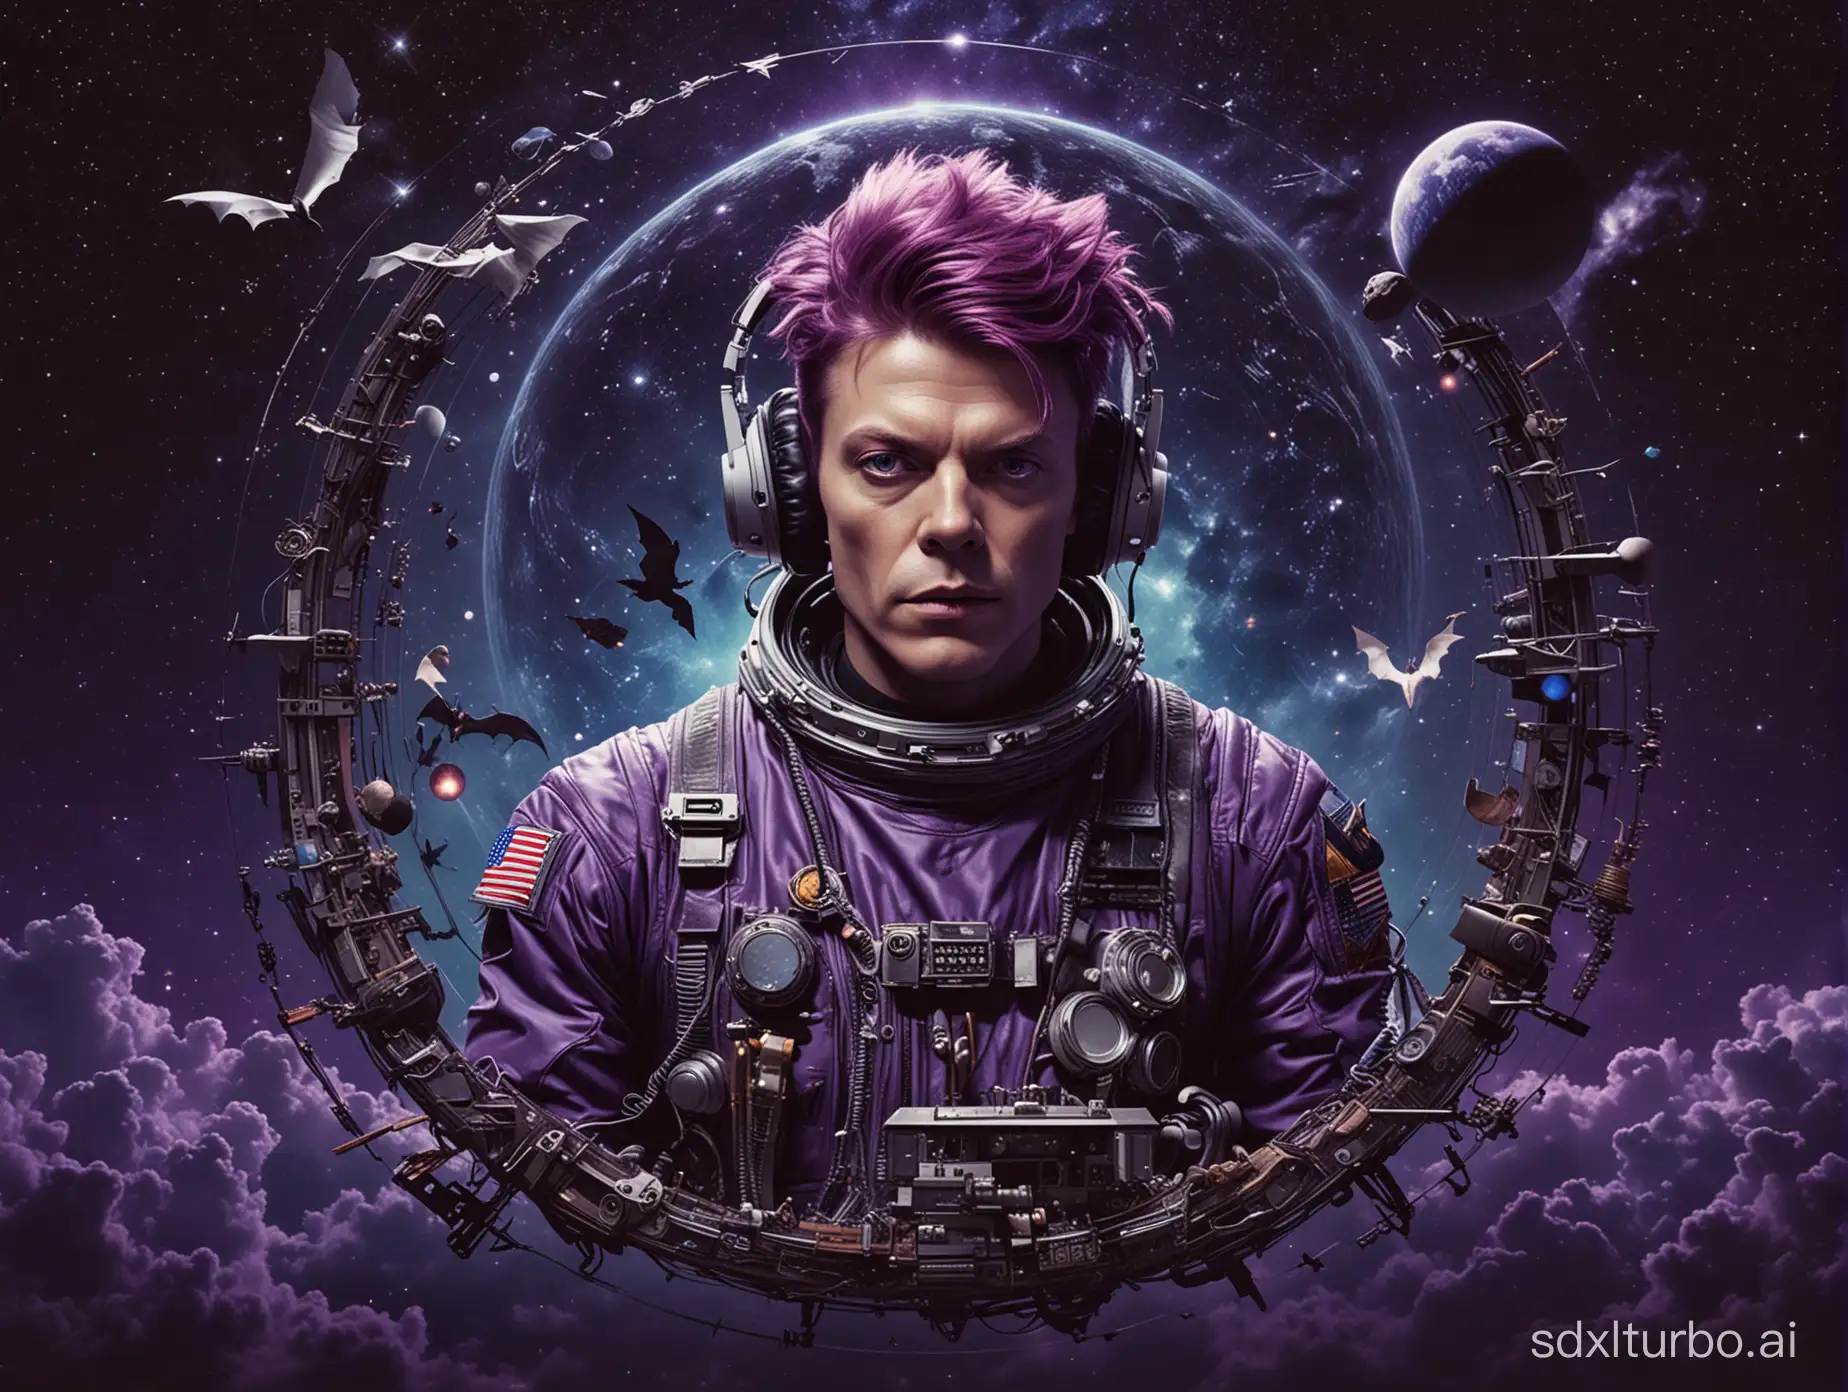 Celestial-Bowie-Astronaut-Inspired-by-David-Bowie-Amid-Gothic-Space-Symphony